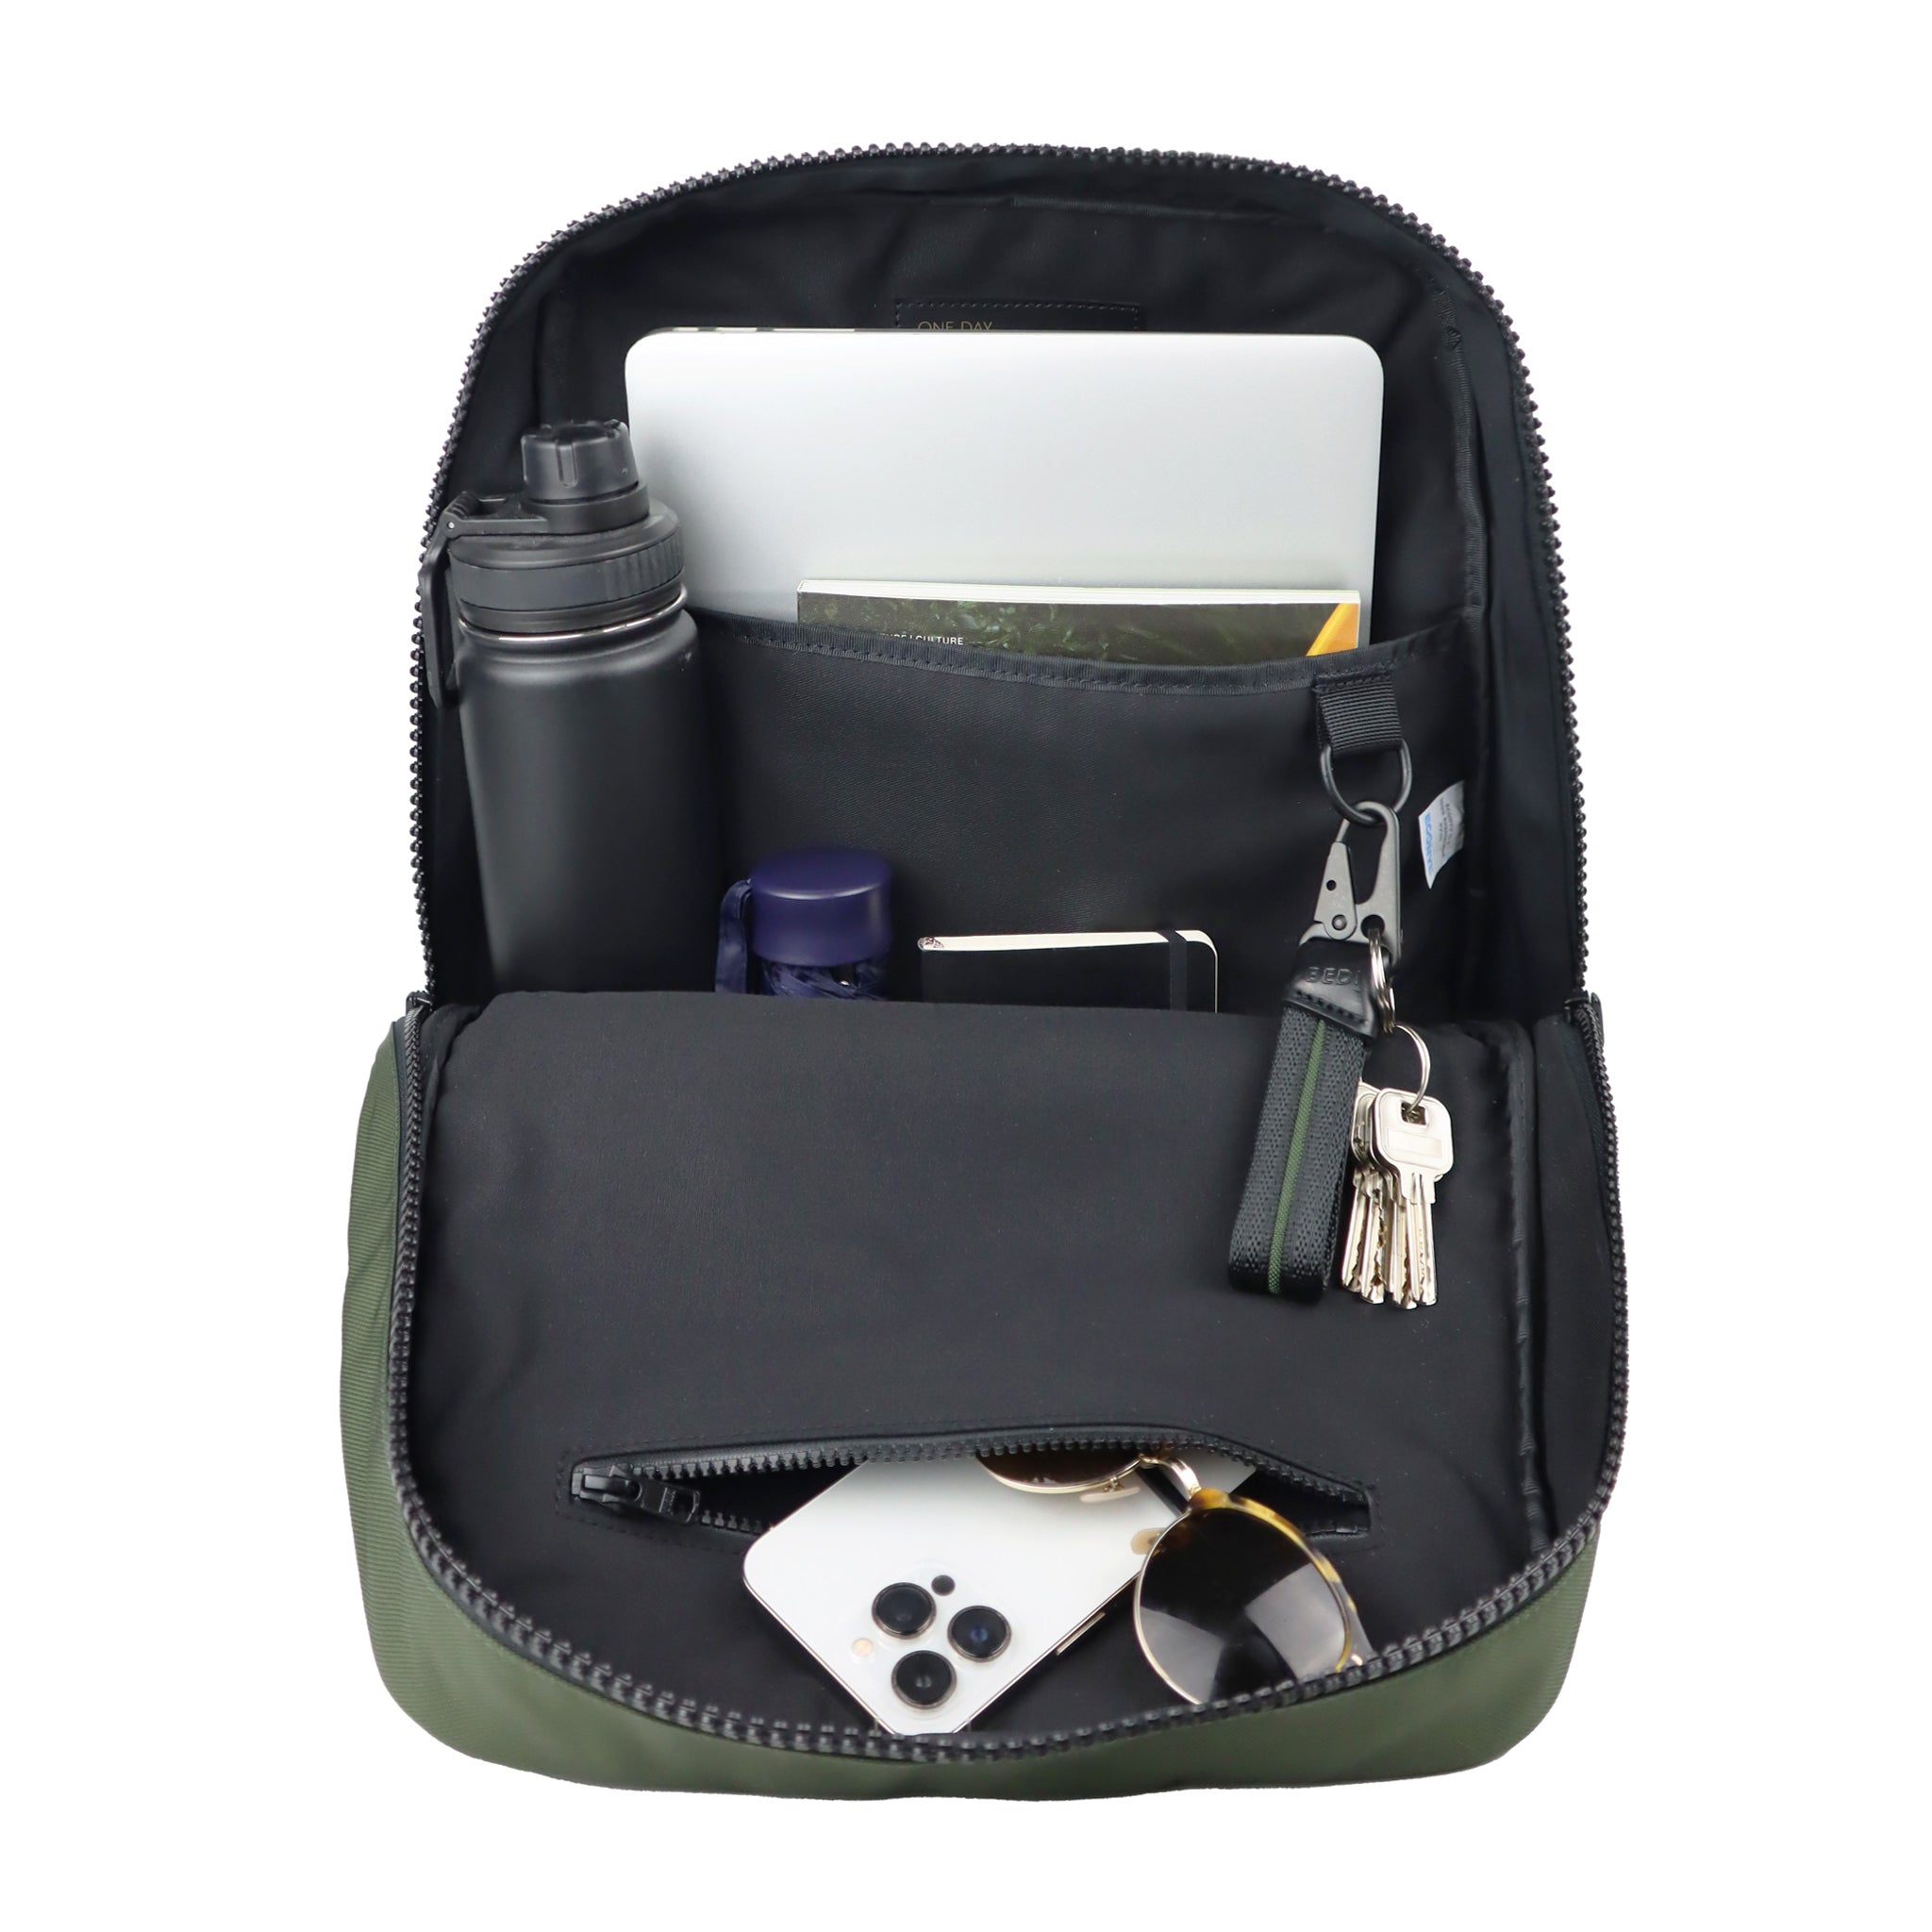 The CHE backpack with the main compartment open, showing the contents. Contents include: a water bottle, umbrella, magazine, laptop, iPhone, sunglasses and keychain. 